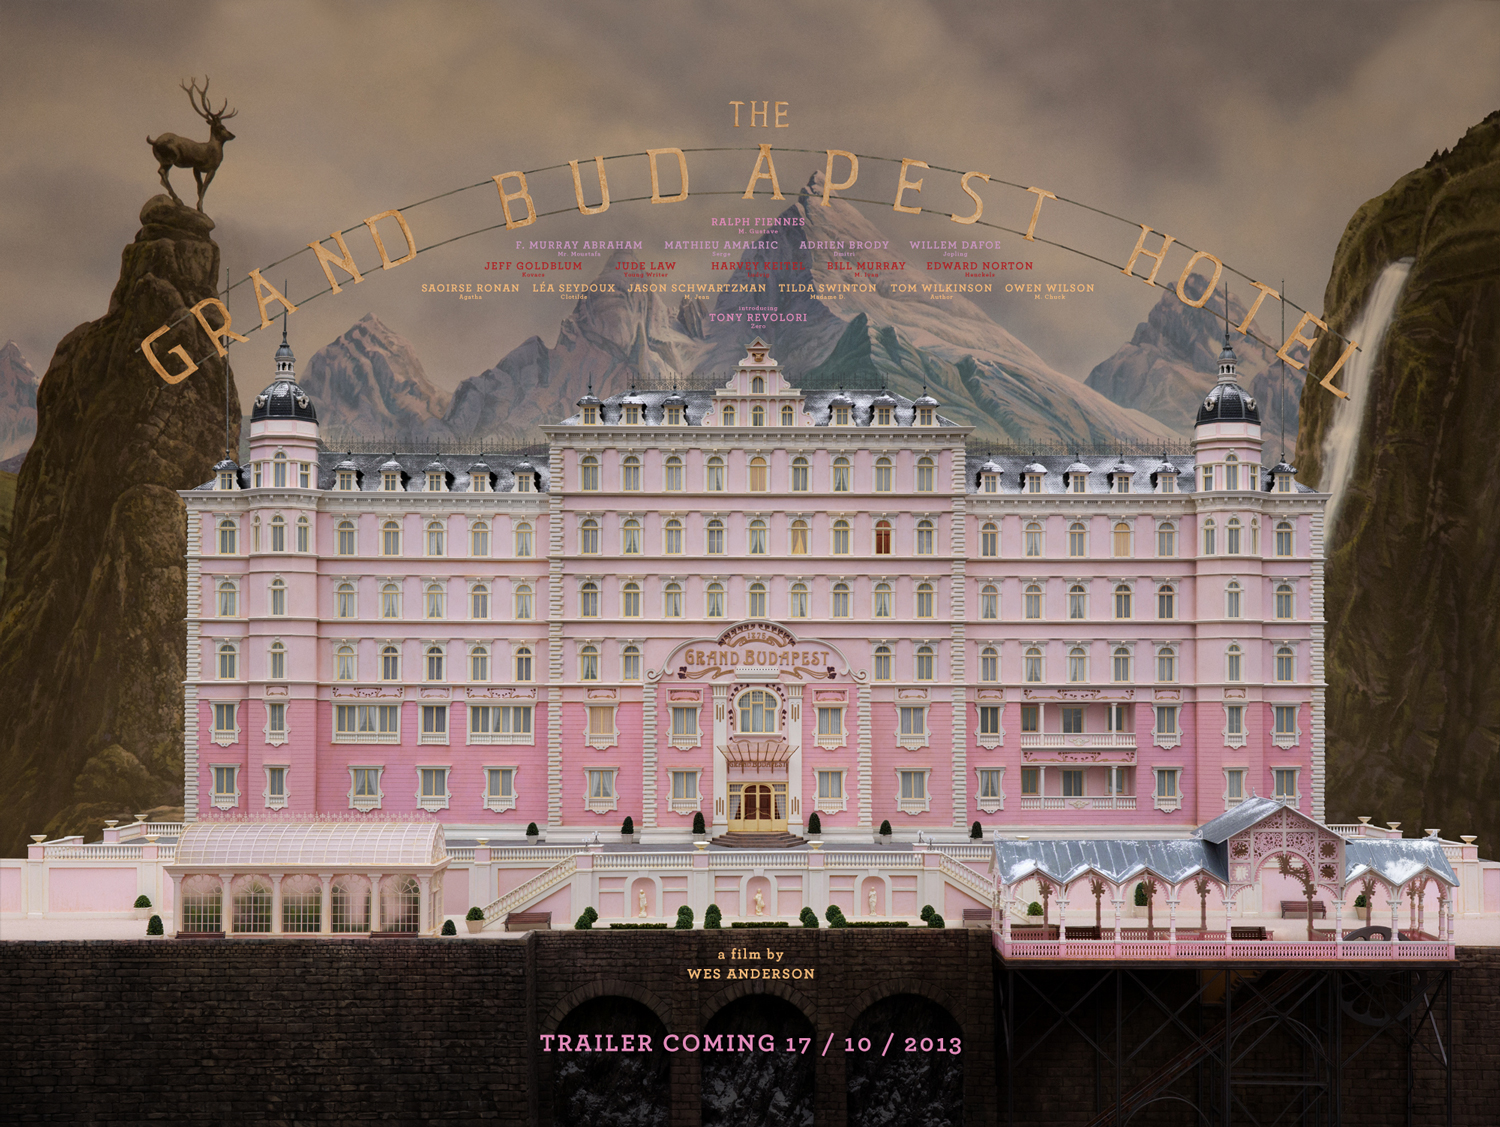 First Poster for 'The Grand Budapest Hotel' Advertises a 